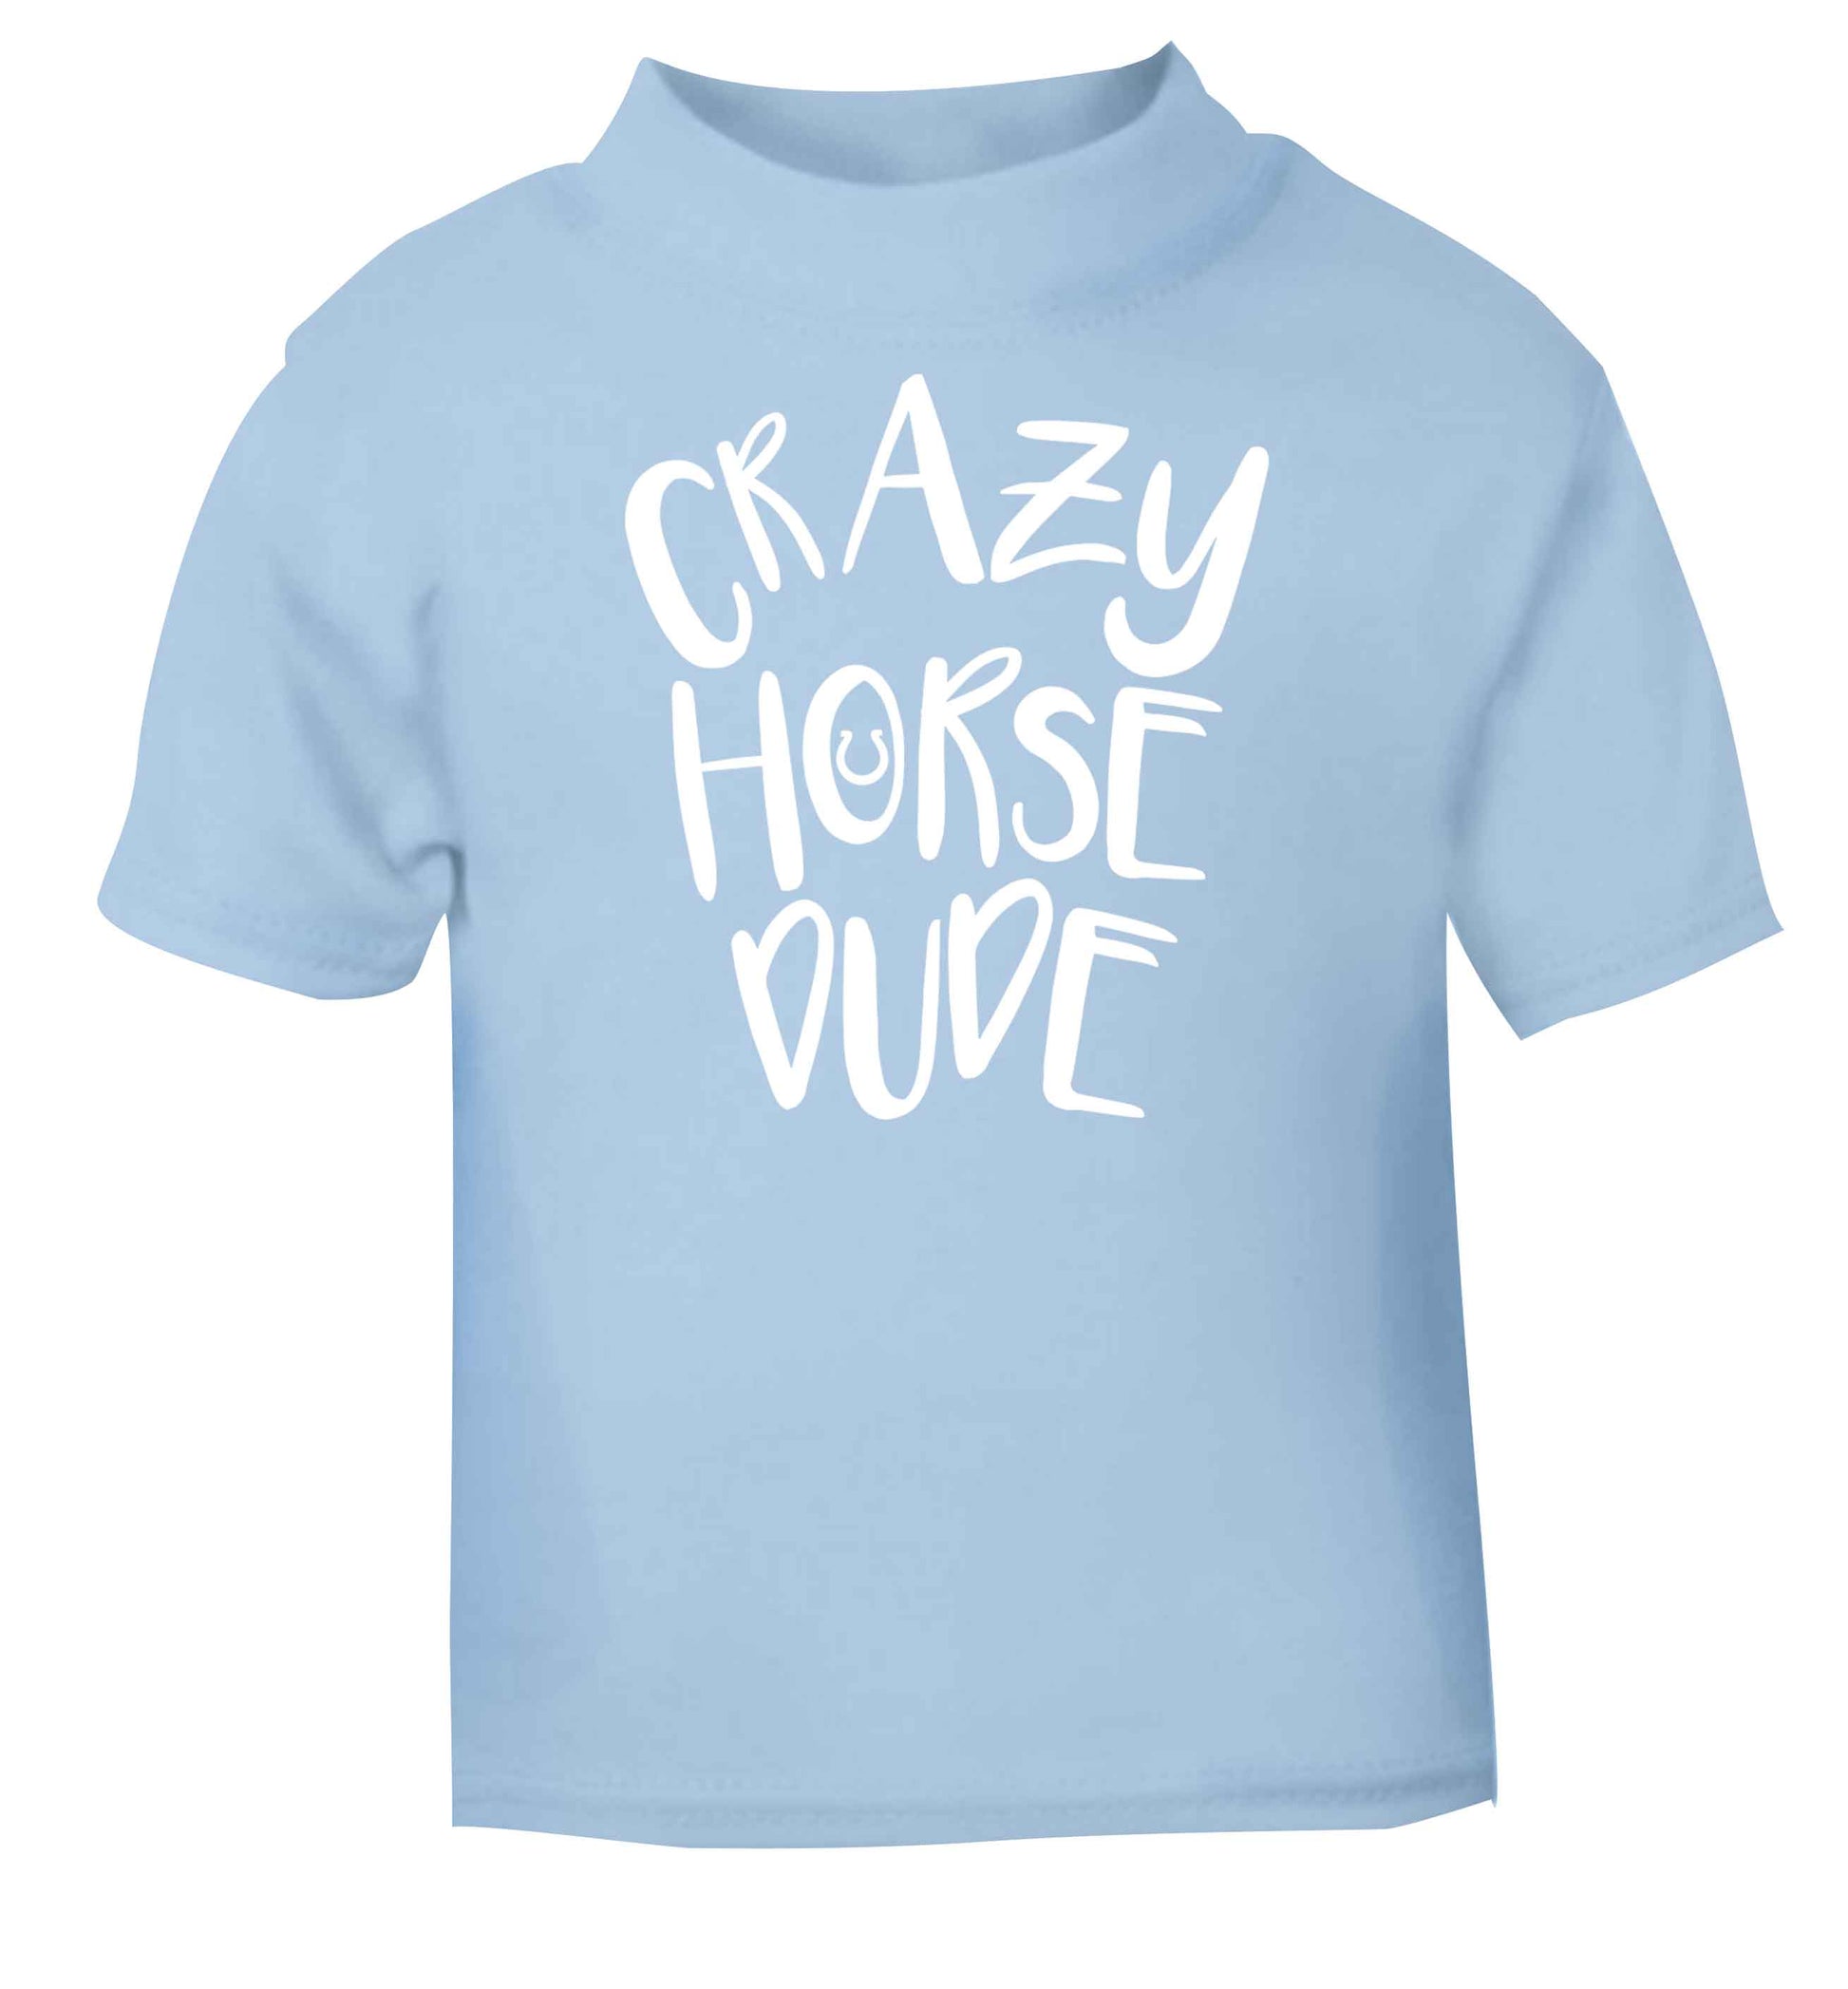 Crazy horse dude light blue baby toddler Tshirt 2 Years